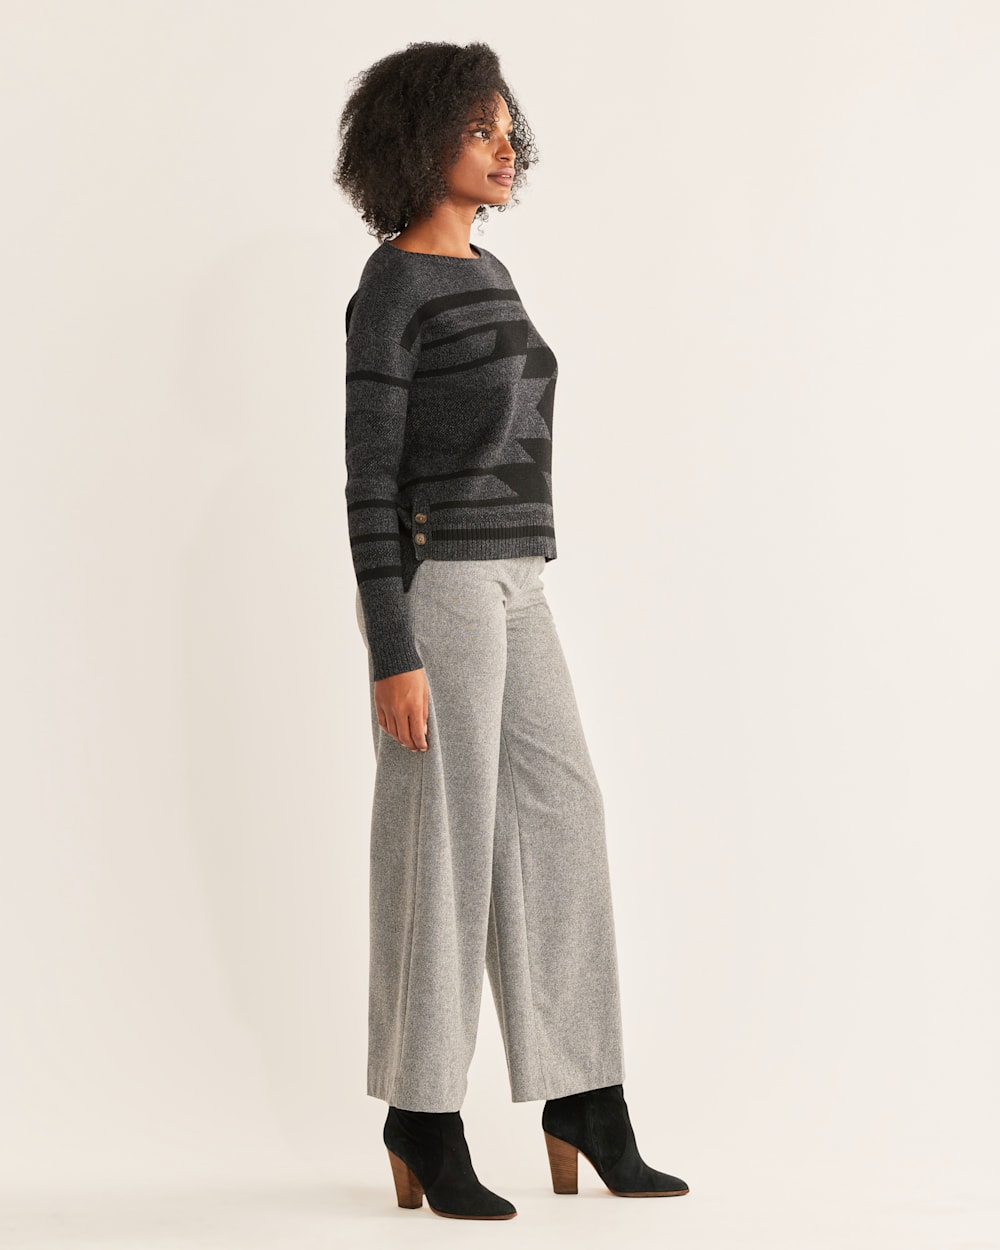 ALTERNATE VIEW OF WOMEN'S SIDE-BUTTON MERINO SWEATER IN CHARCOAL HEATHER/BLACK image number 2